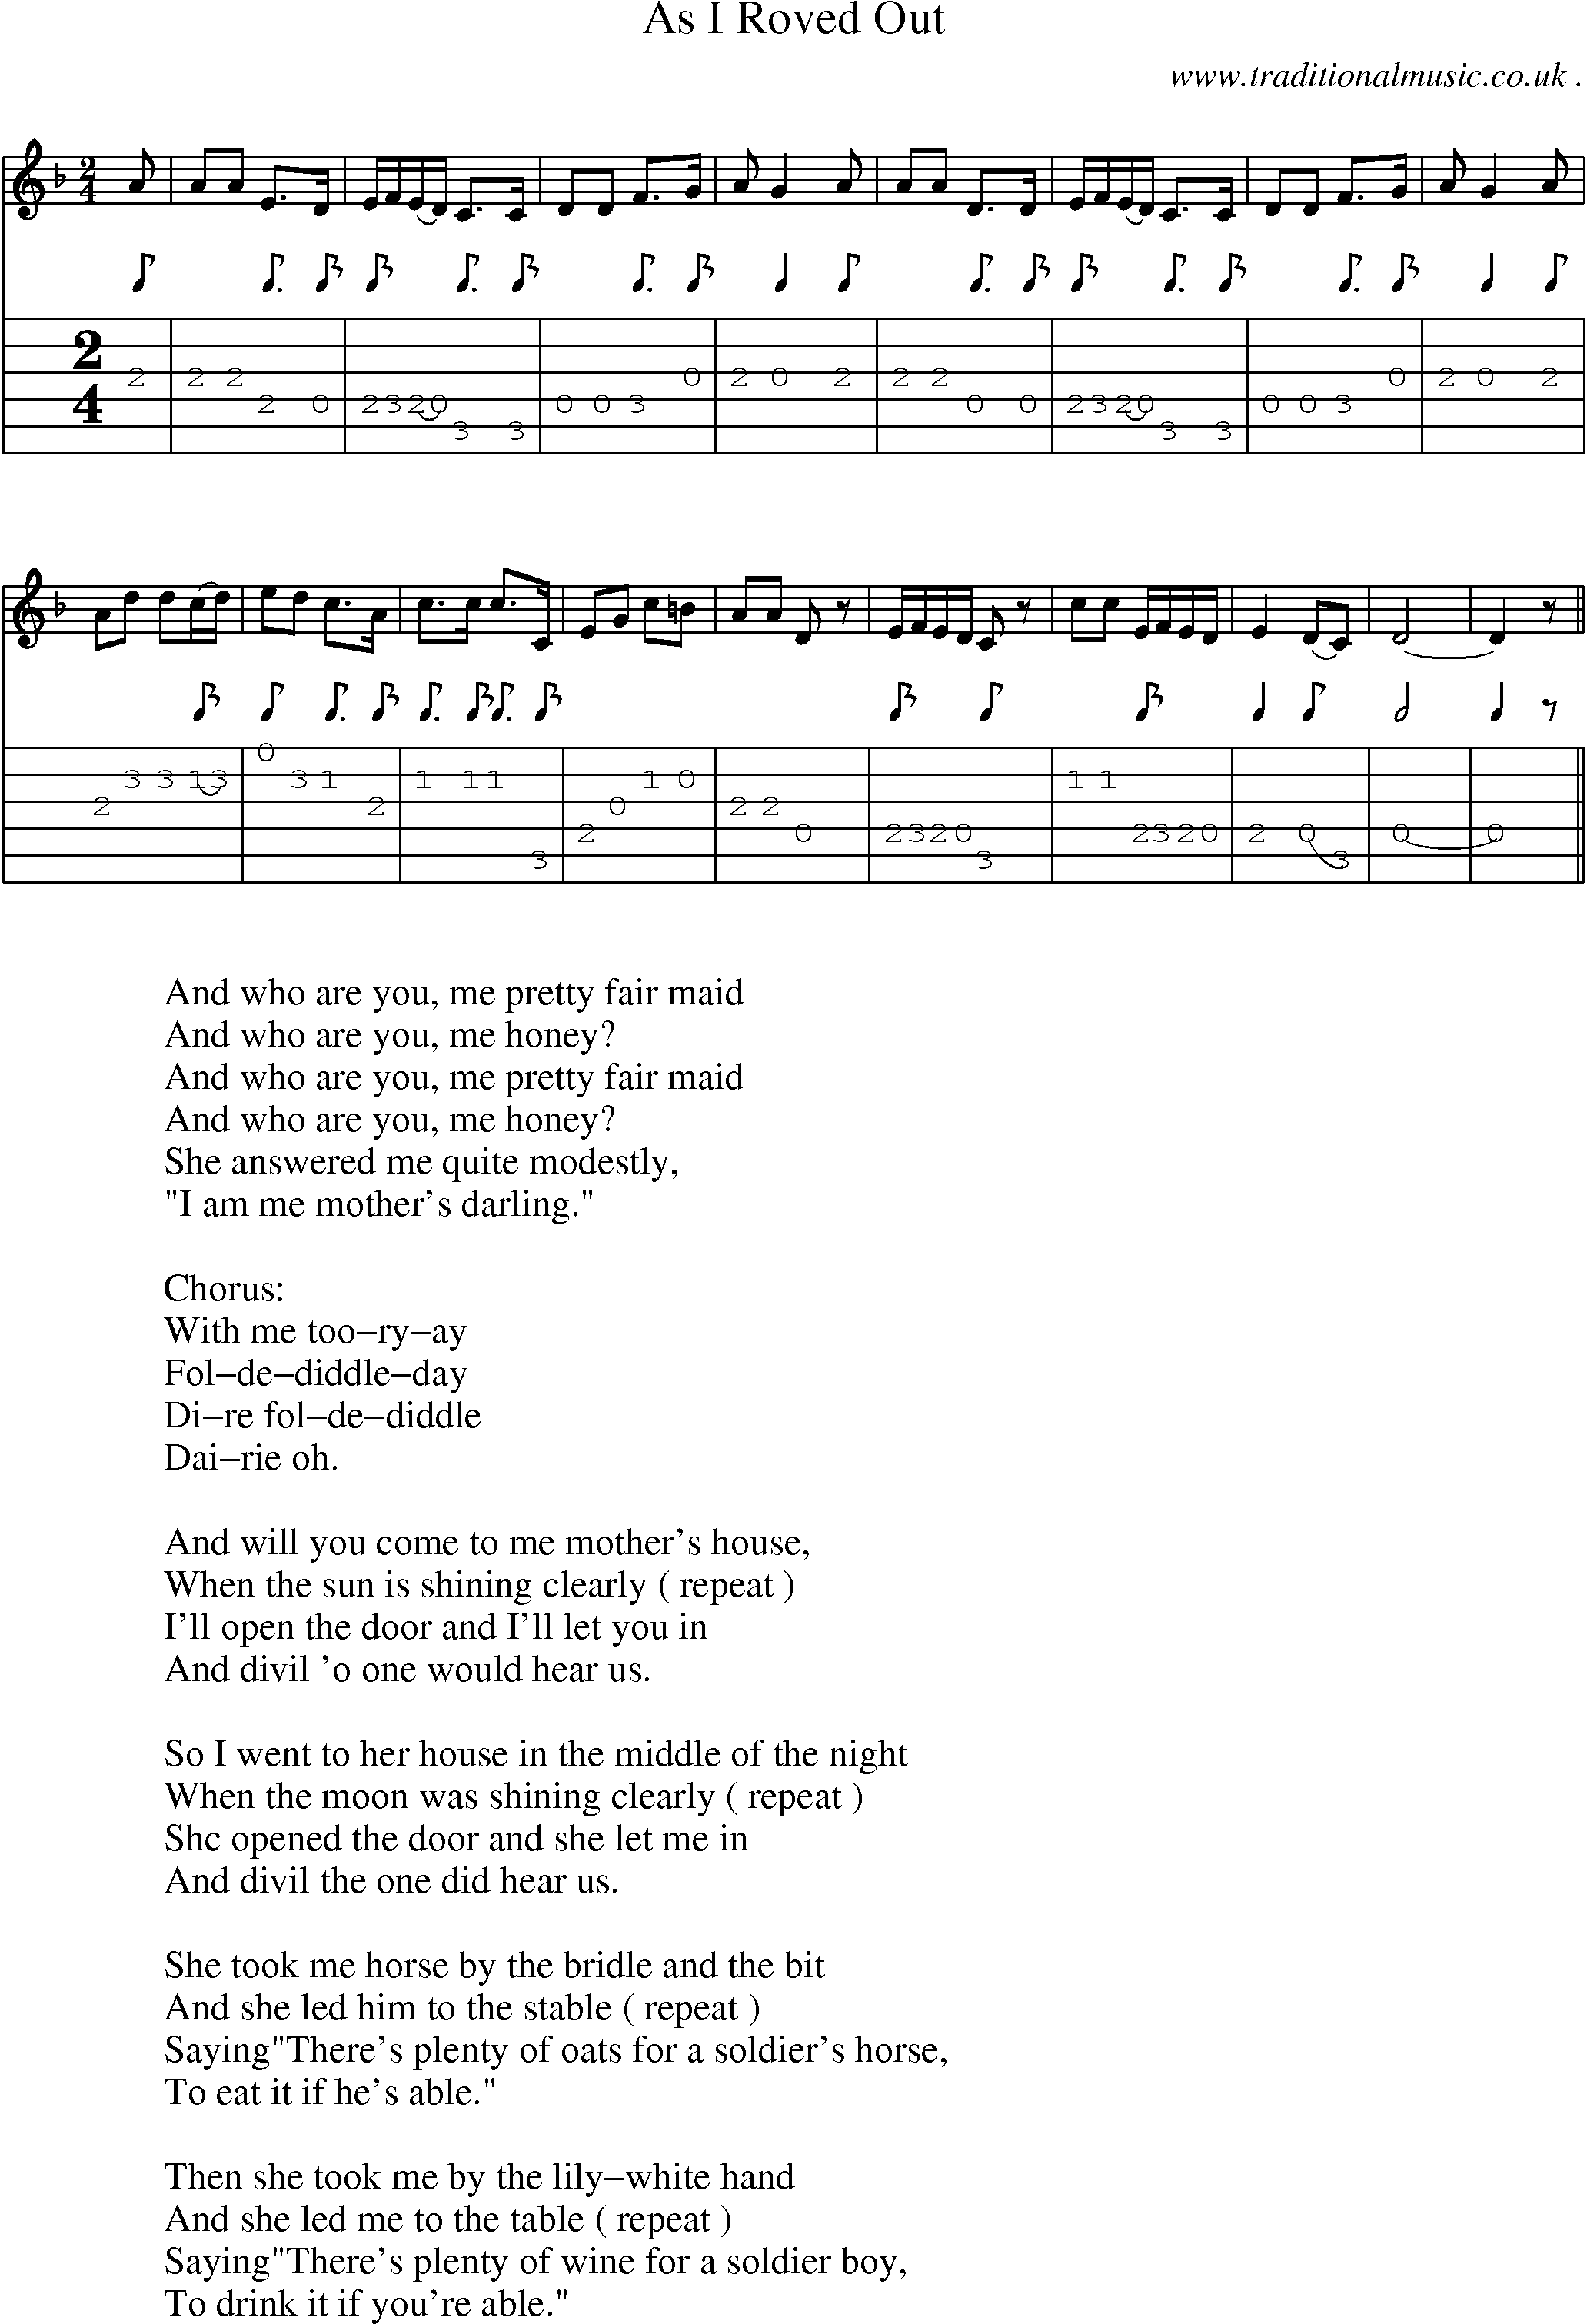 Sheet-Music and Guitar Tabs for As I Roved Out